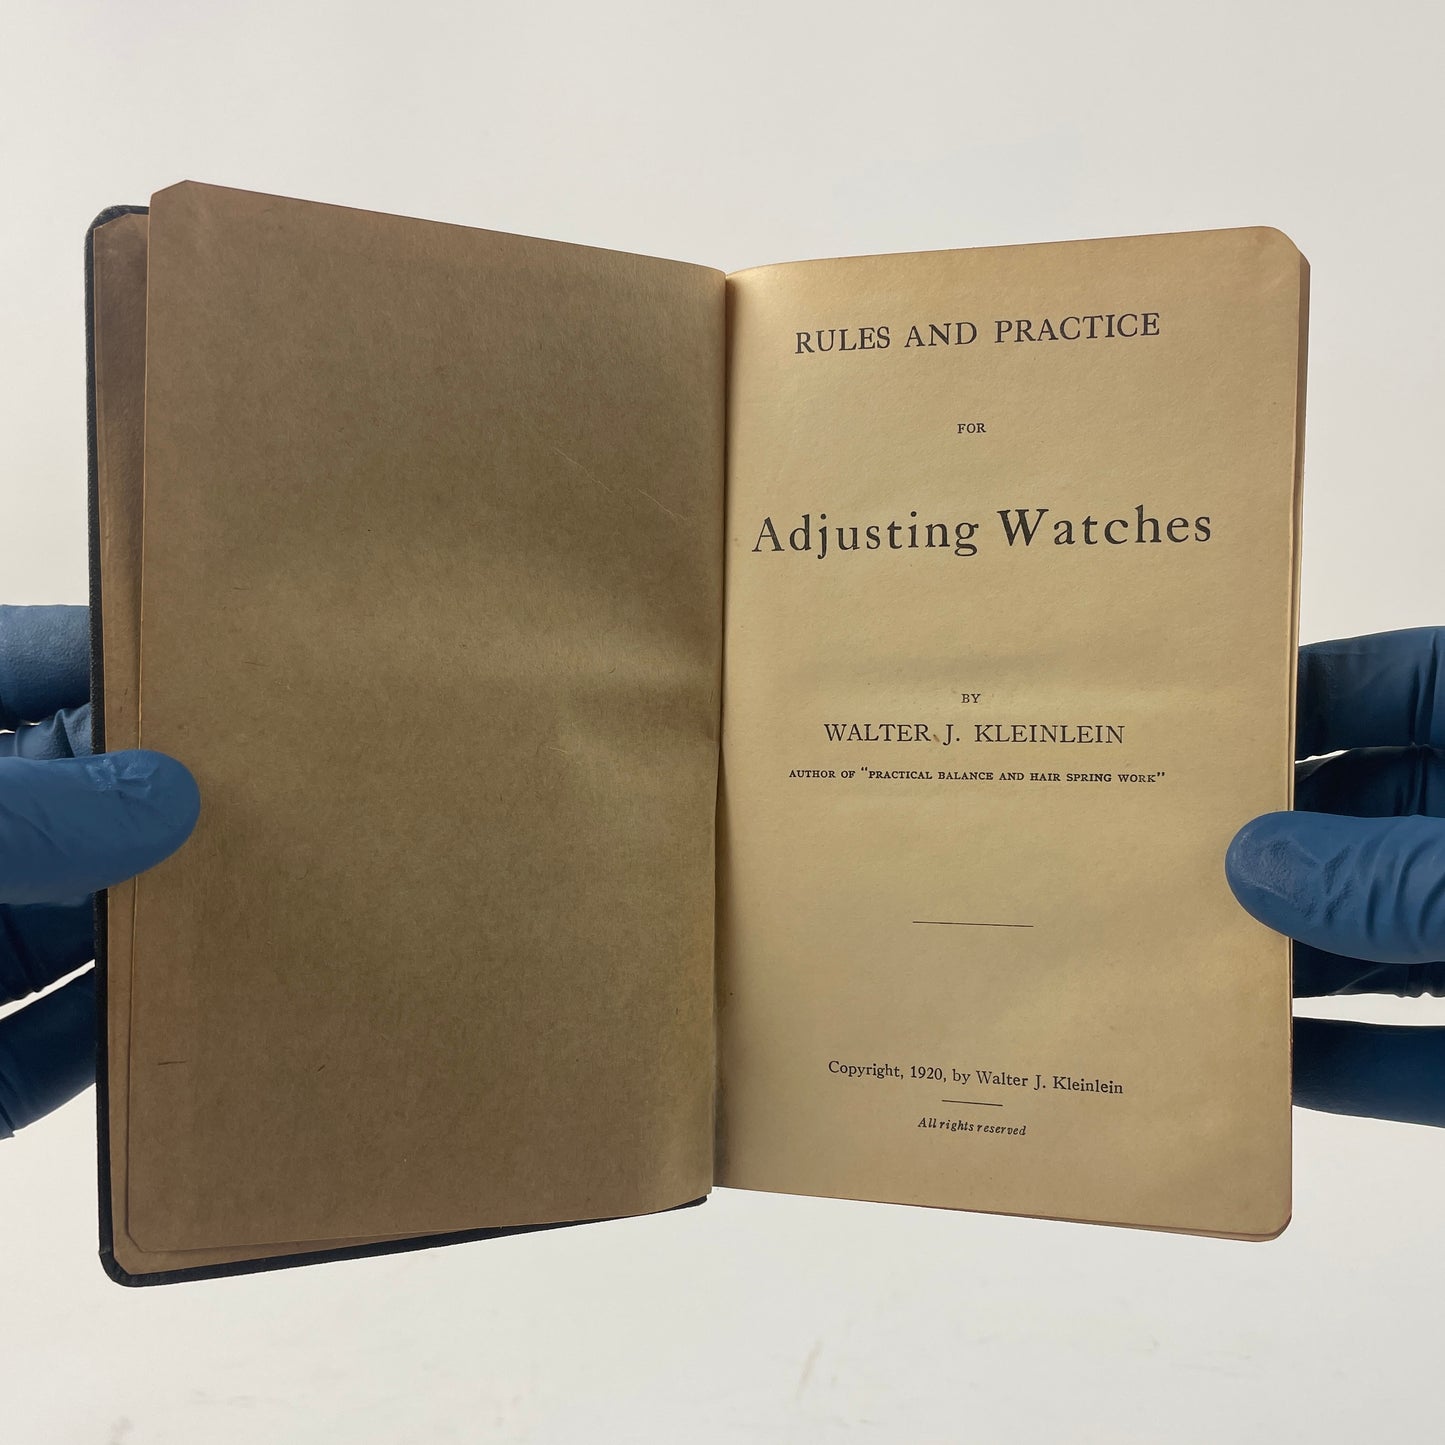 May Lot 58 - Rules and Practice for Adjusting Watches